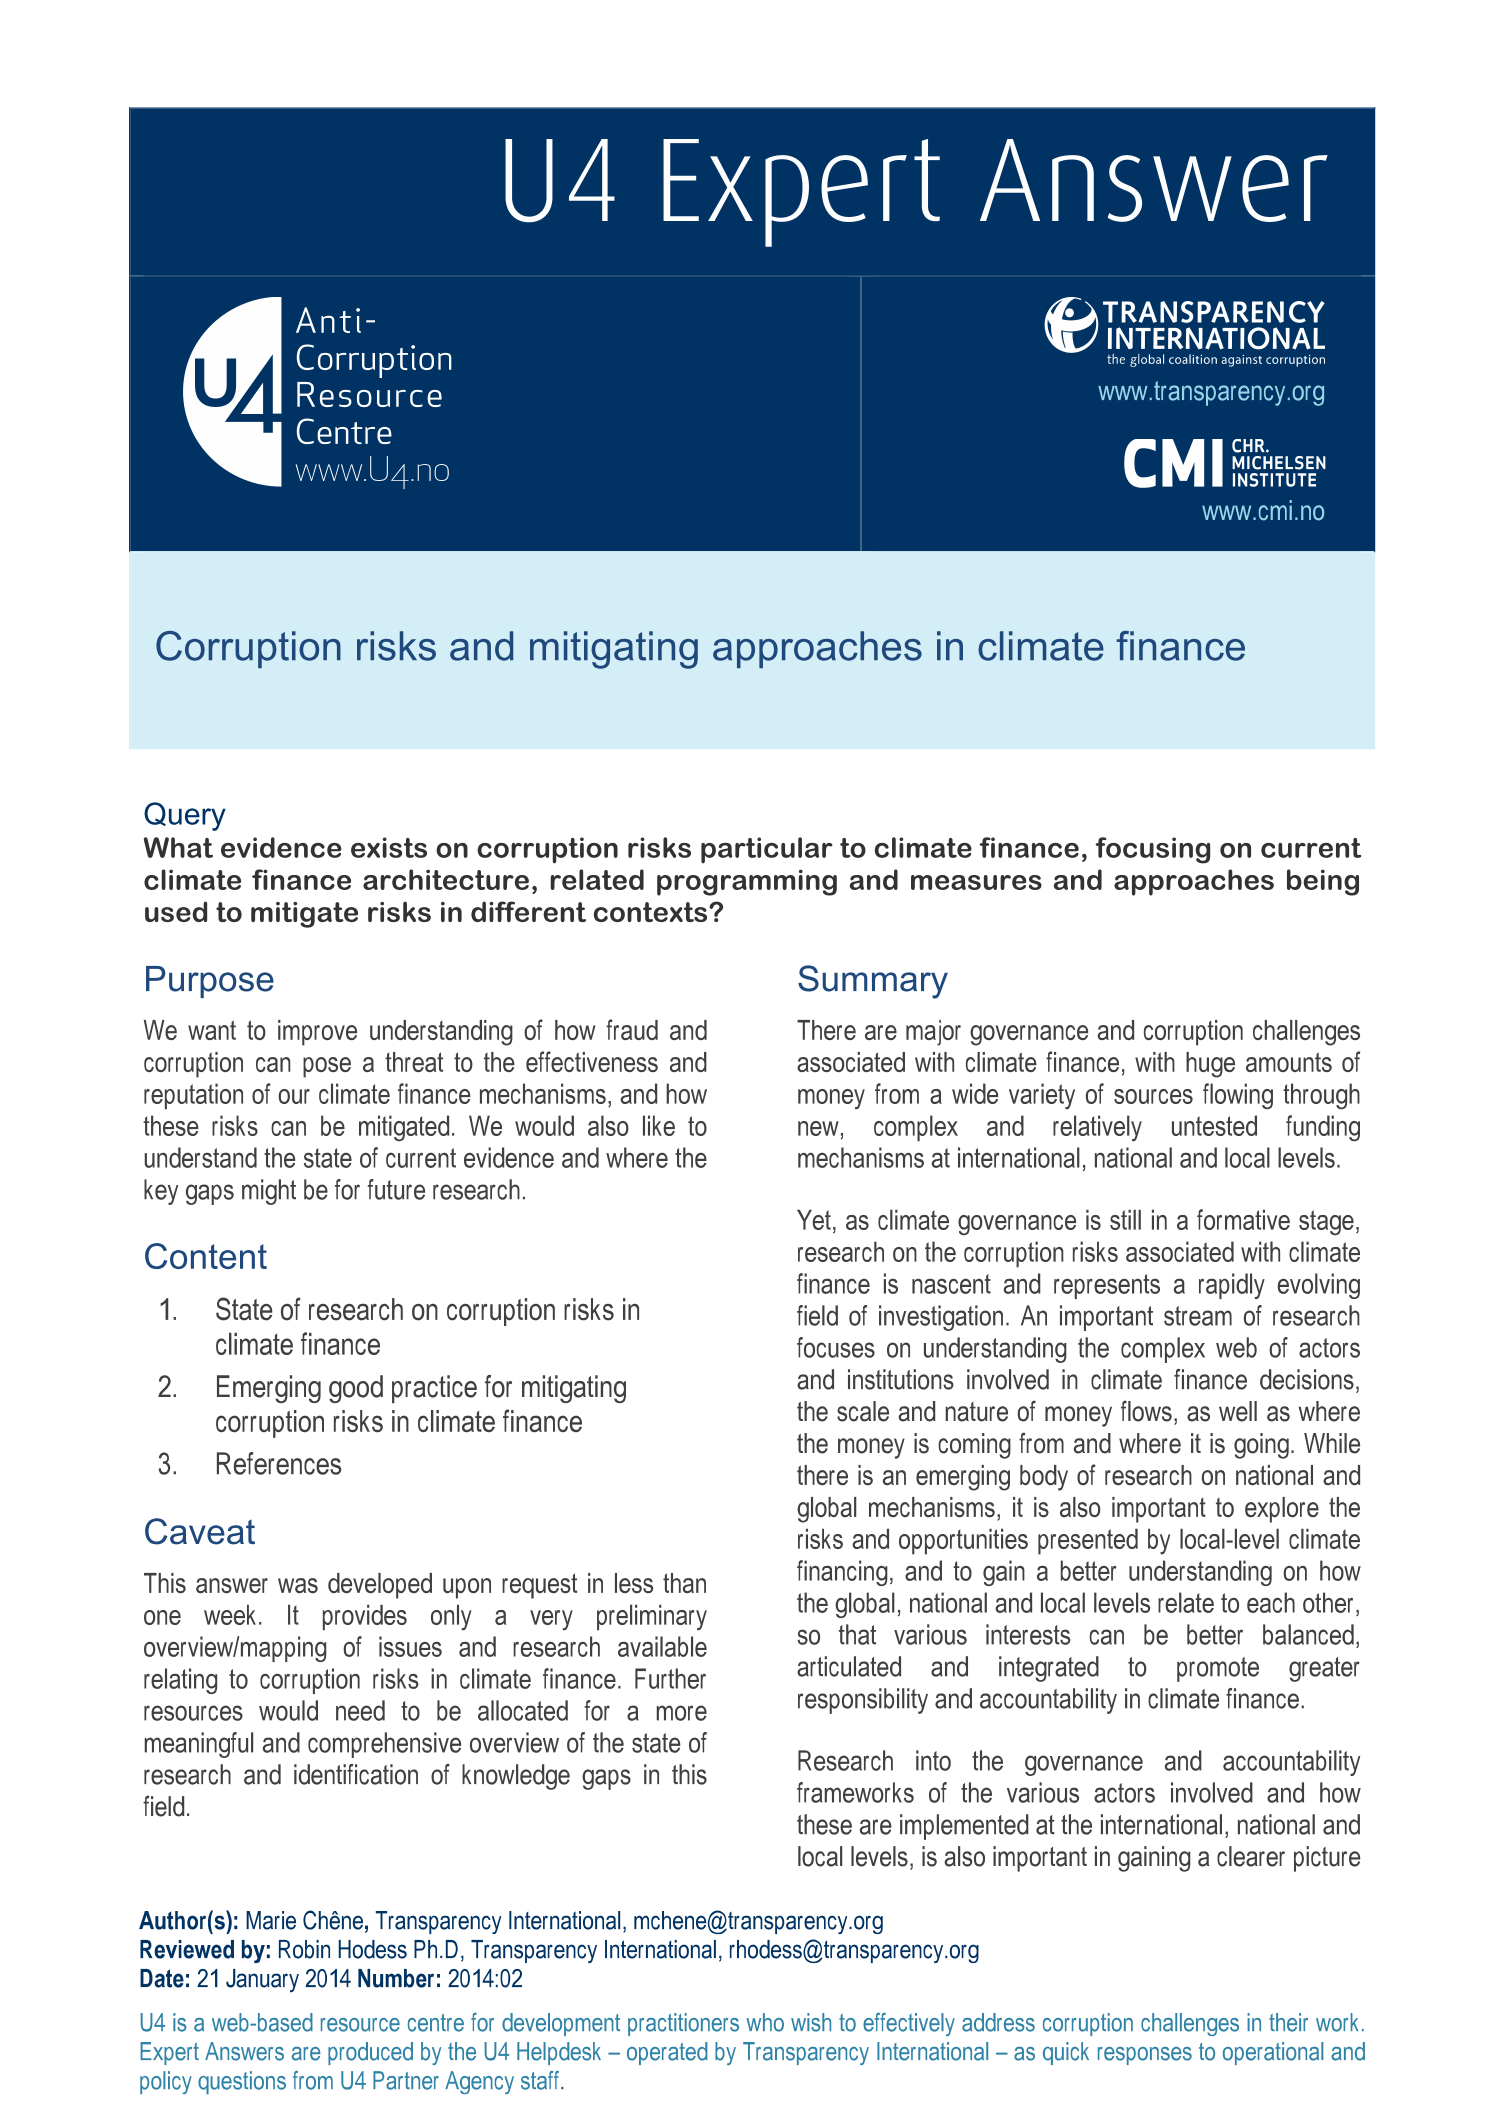 Corruption risks and mitigating approaches in climate finance